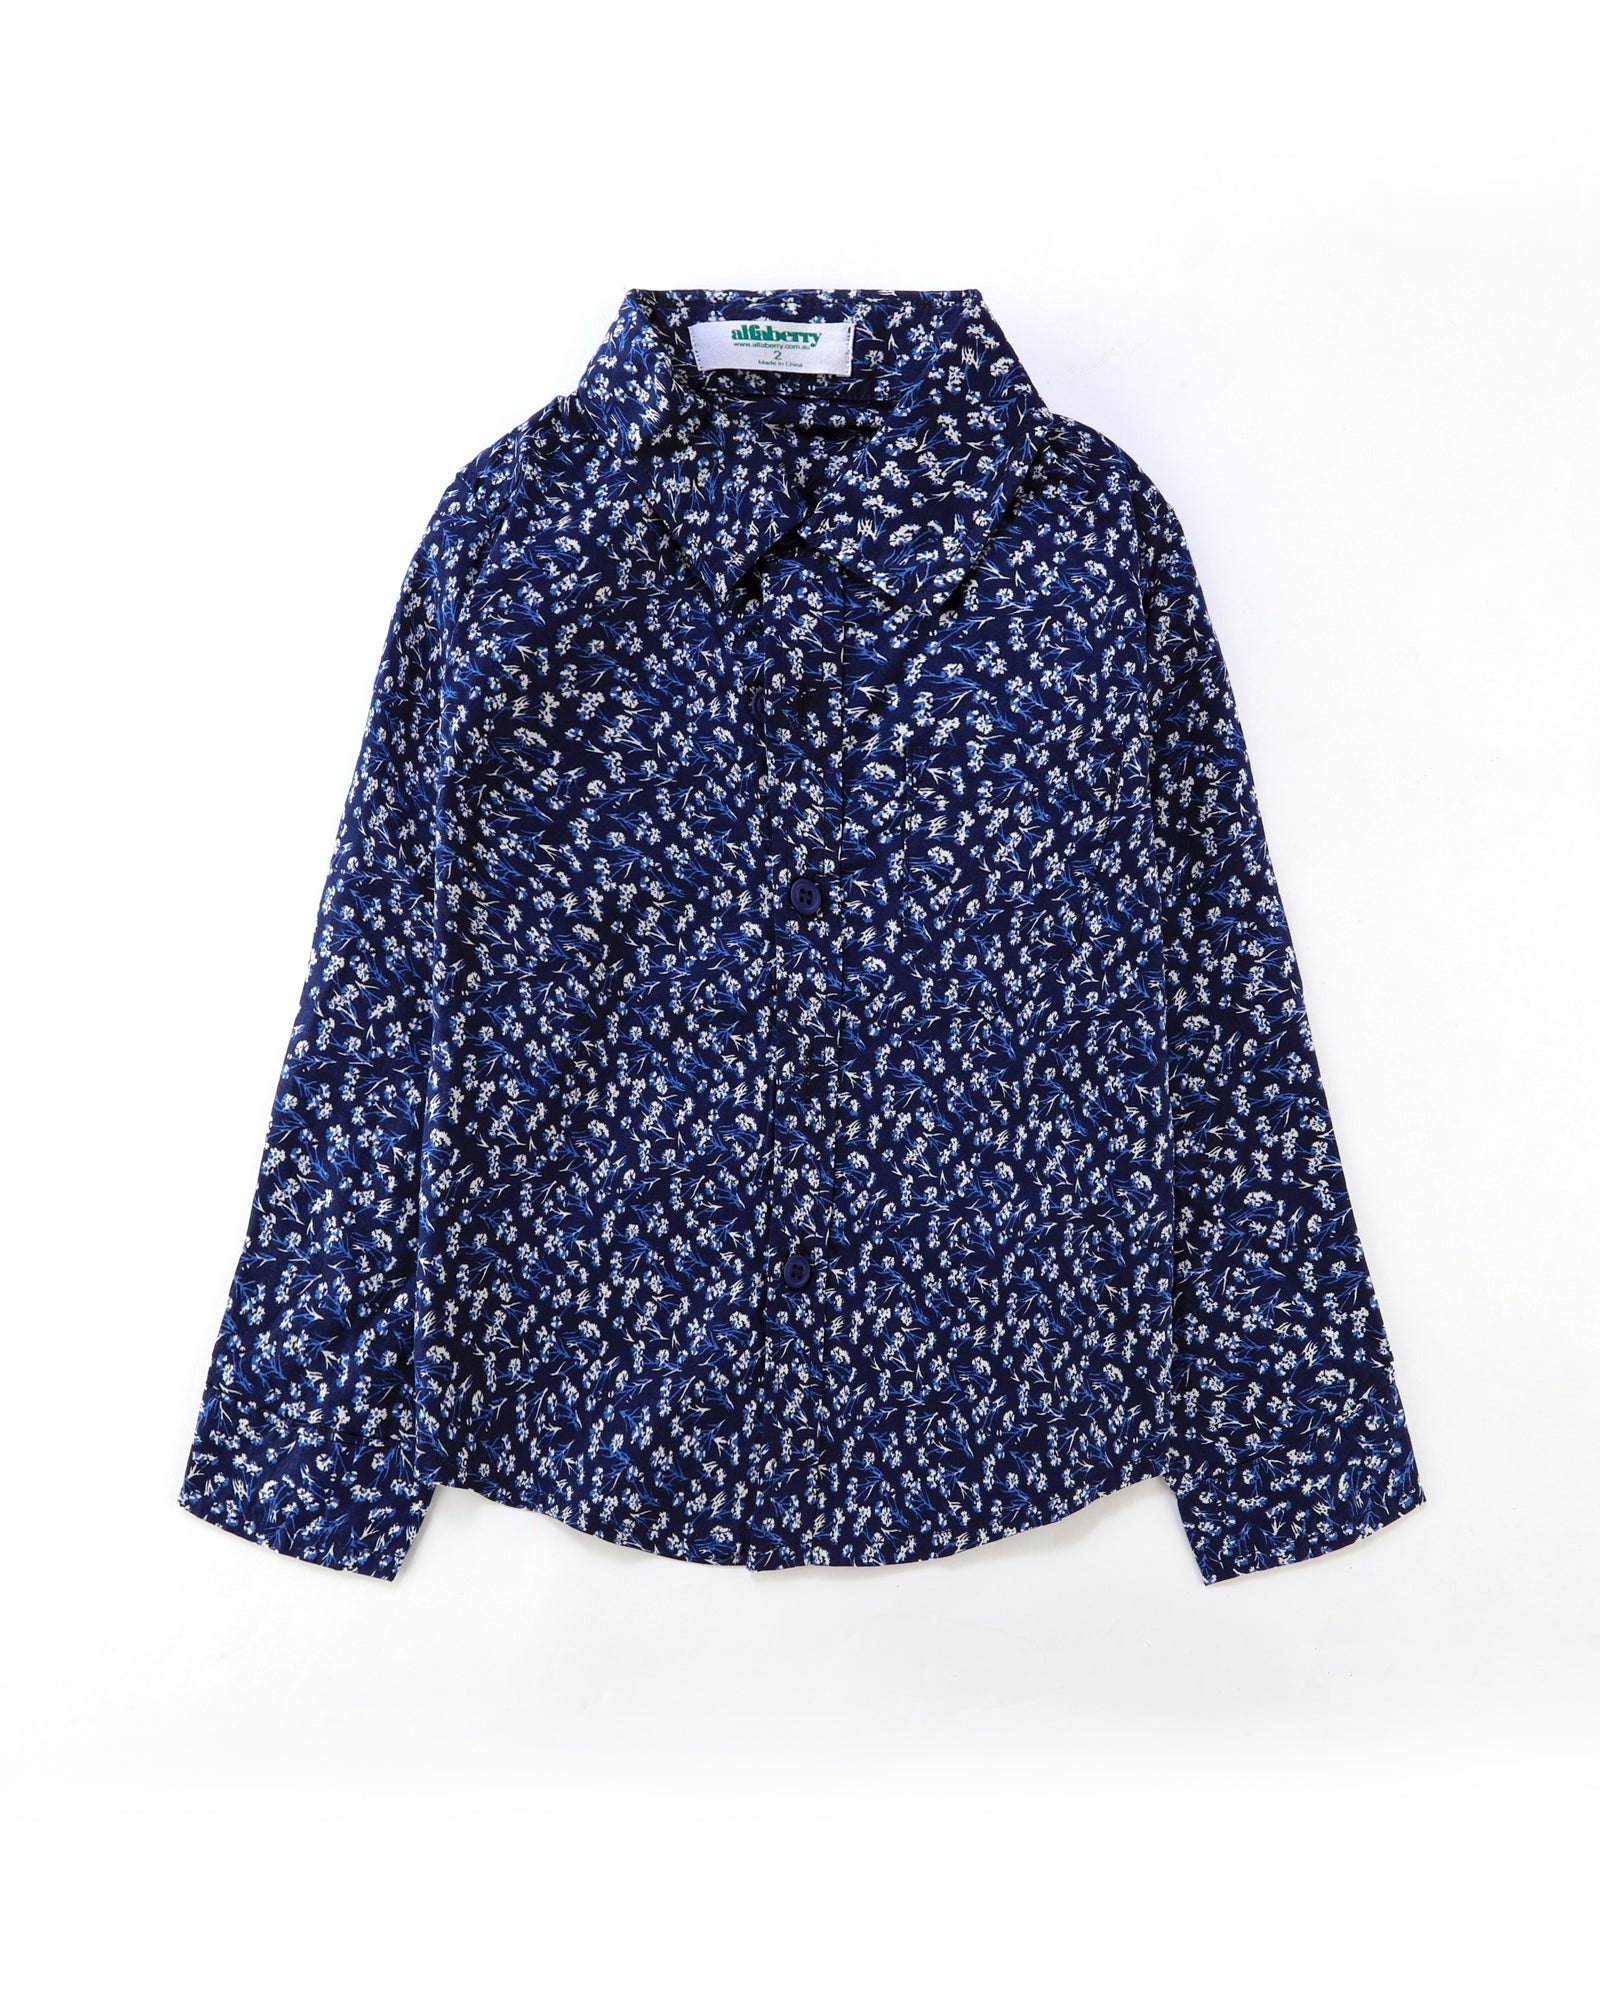 Floral Confetti Long Sleeve Shirt in Navy Front